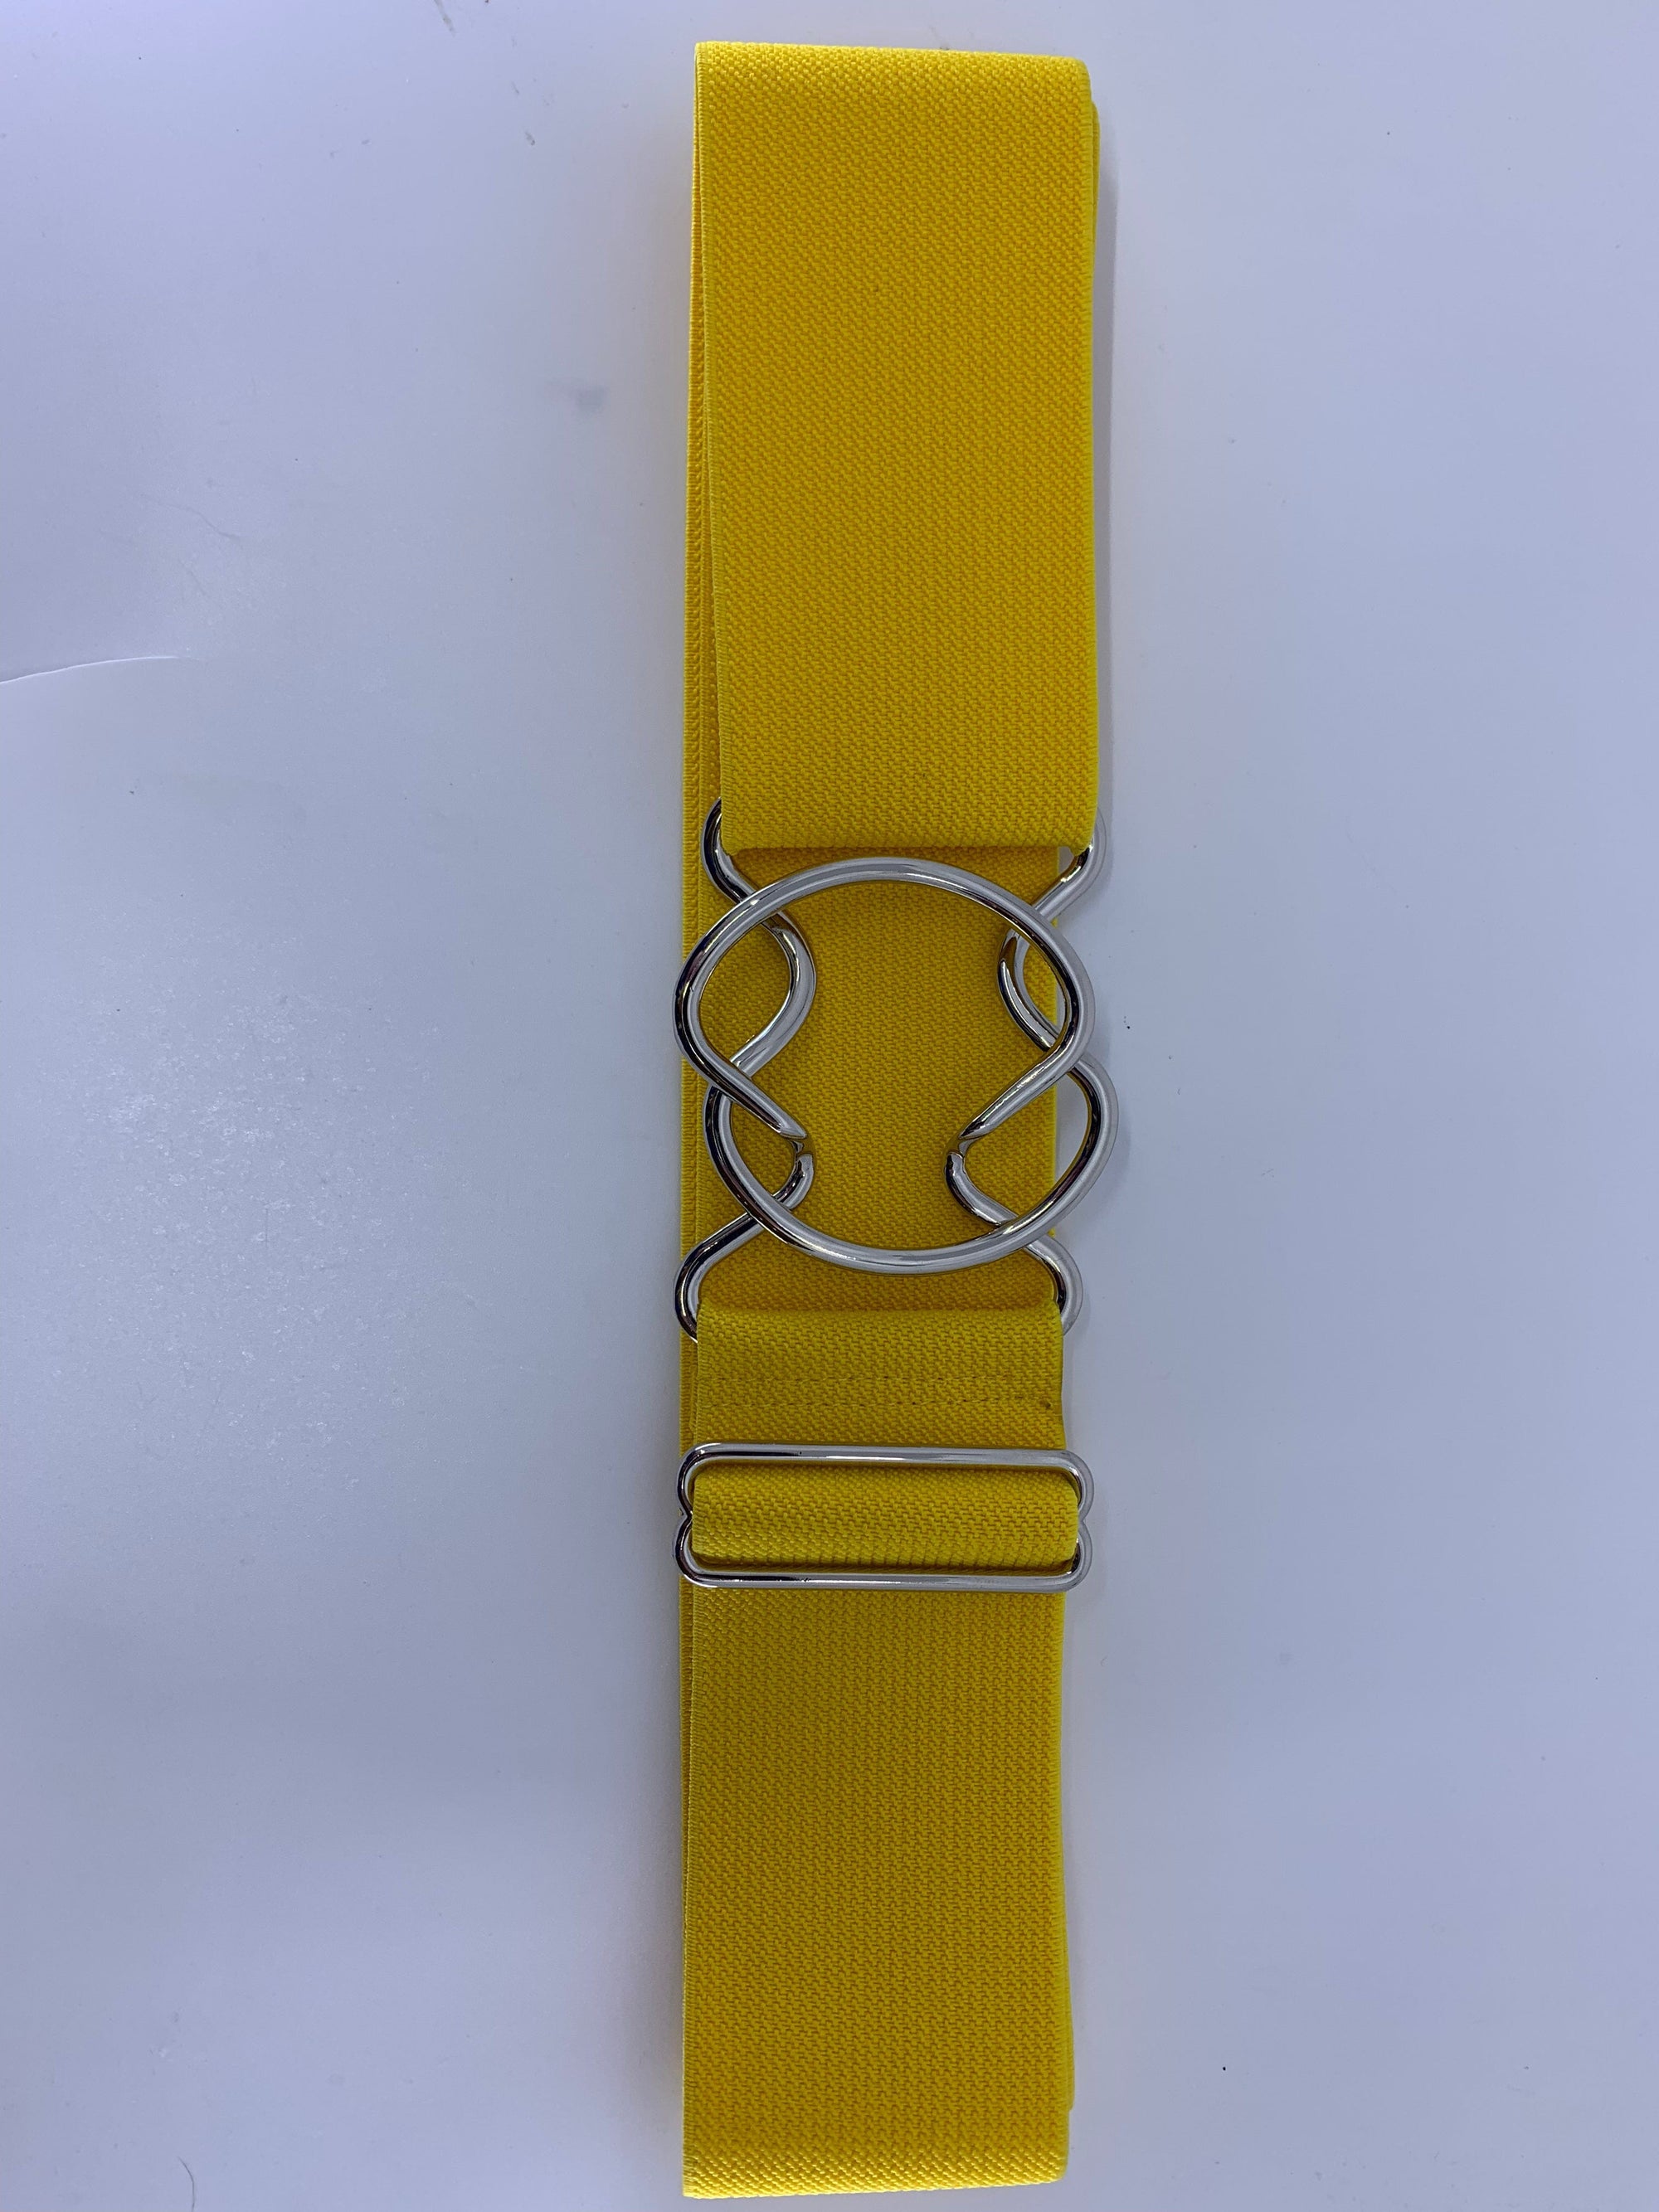 Pony Belts Co. Belt Stretch Belt 2" - Yellow equestrian team apparel online tack store mobile tack store custom farm apparel custom show stable clothing equestrian lifestyle horse show clothing riding clothes horses equestrian tack store